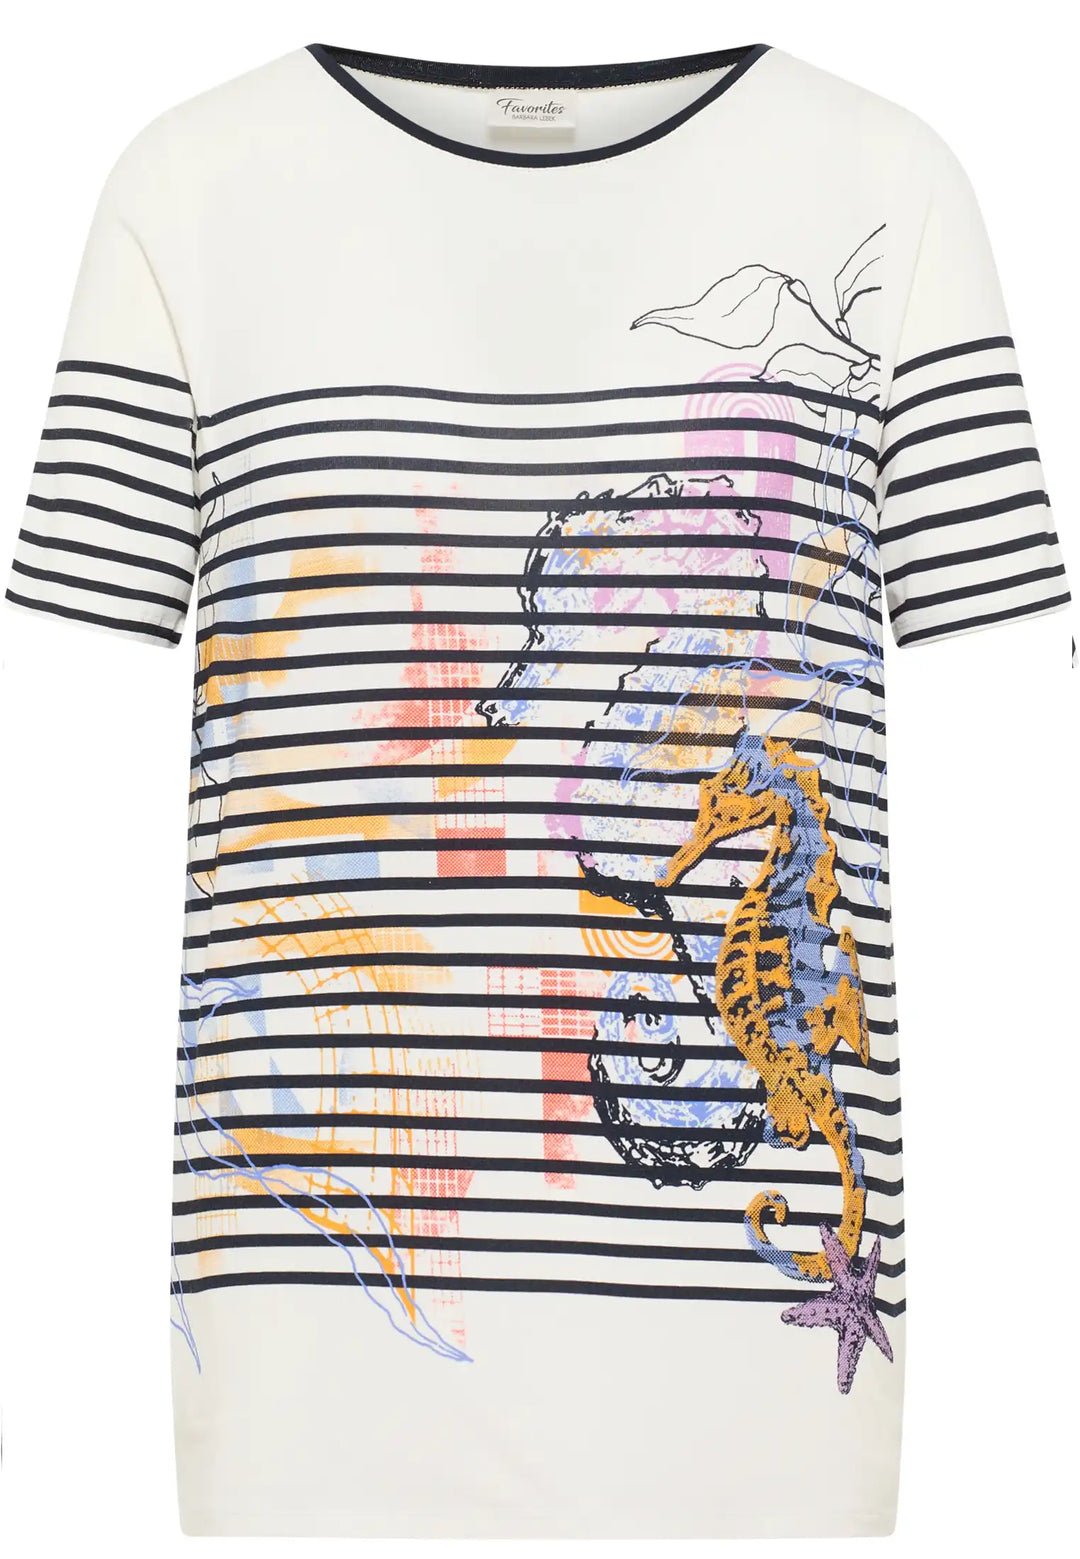 Nautical-themed top with sea horse print, navy stripes, and a splash of pink and blue, combining comfort with whimsical style, style 55720042-120